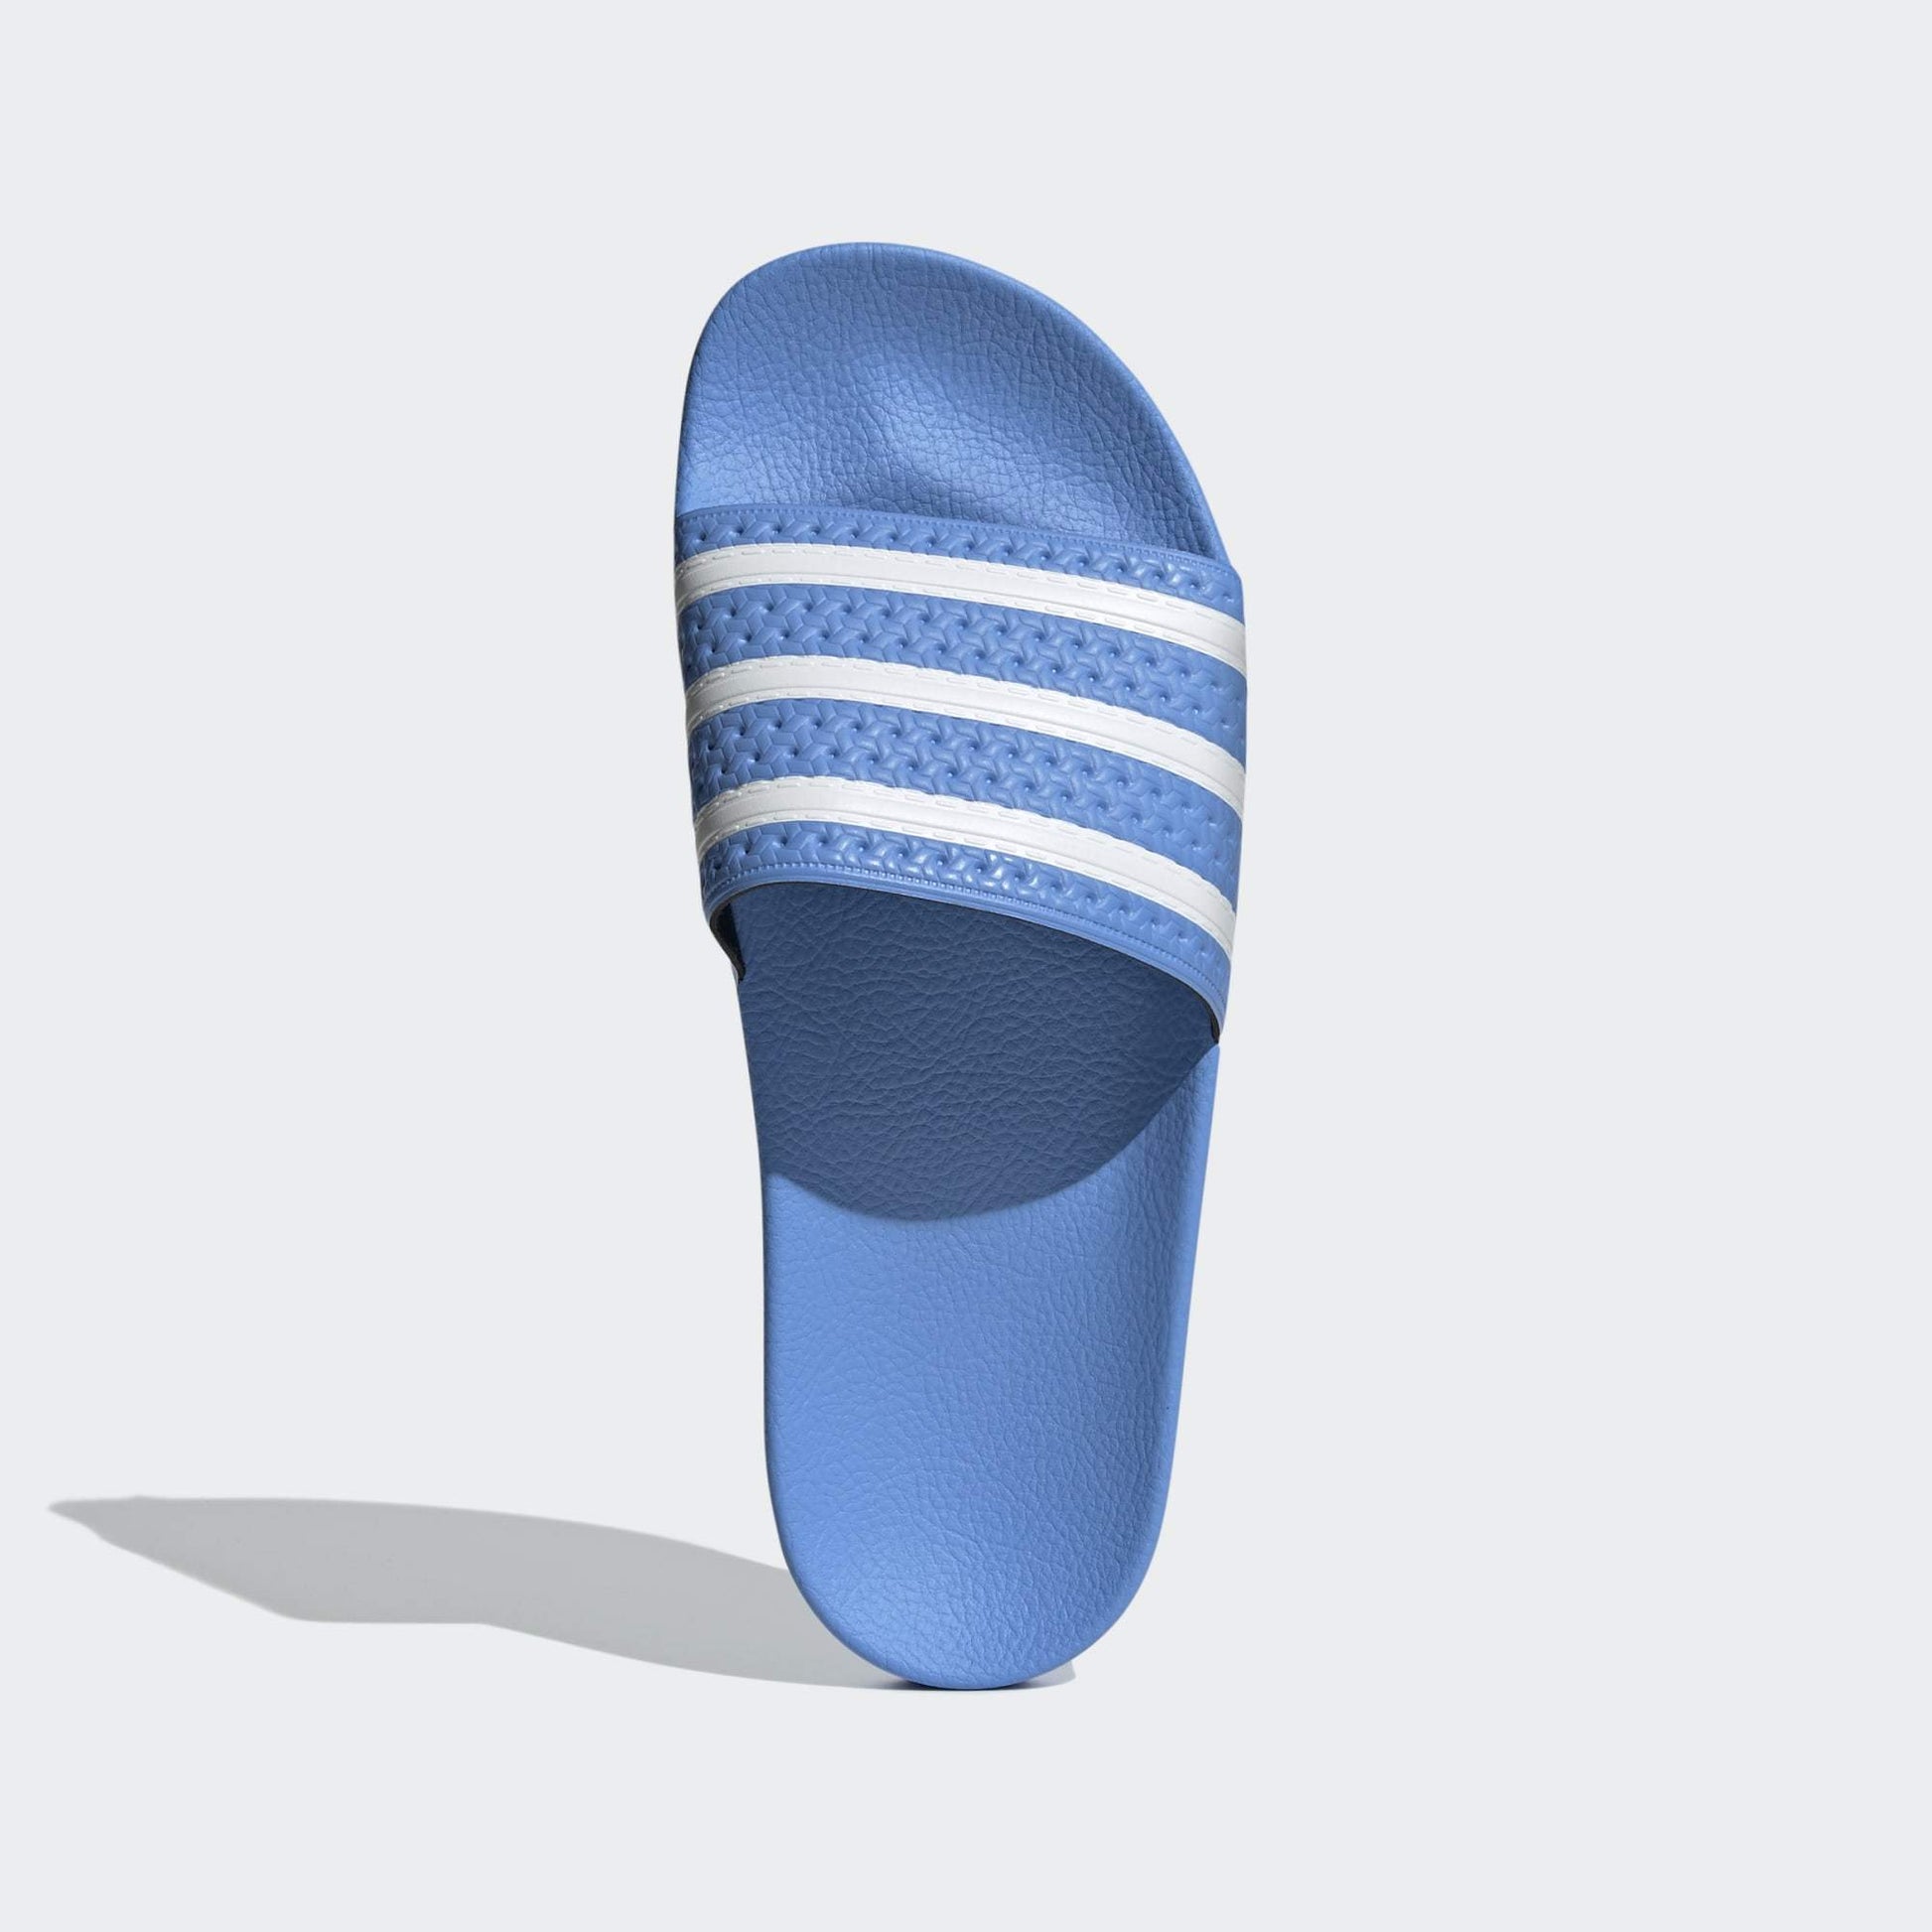 ADILETTE SLIDES REAL BLUE / CLOUD WHITE / REAL BLUE - Discount Store